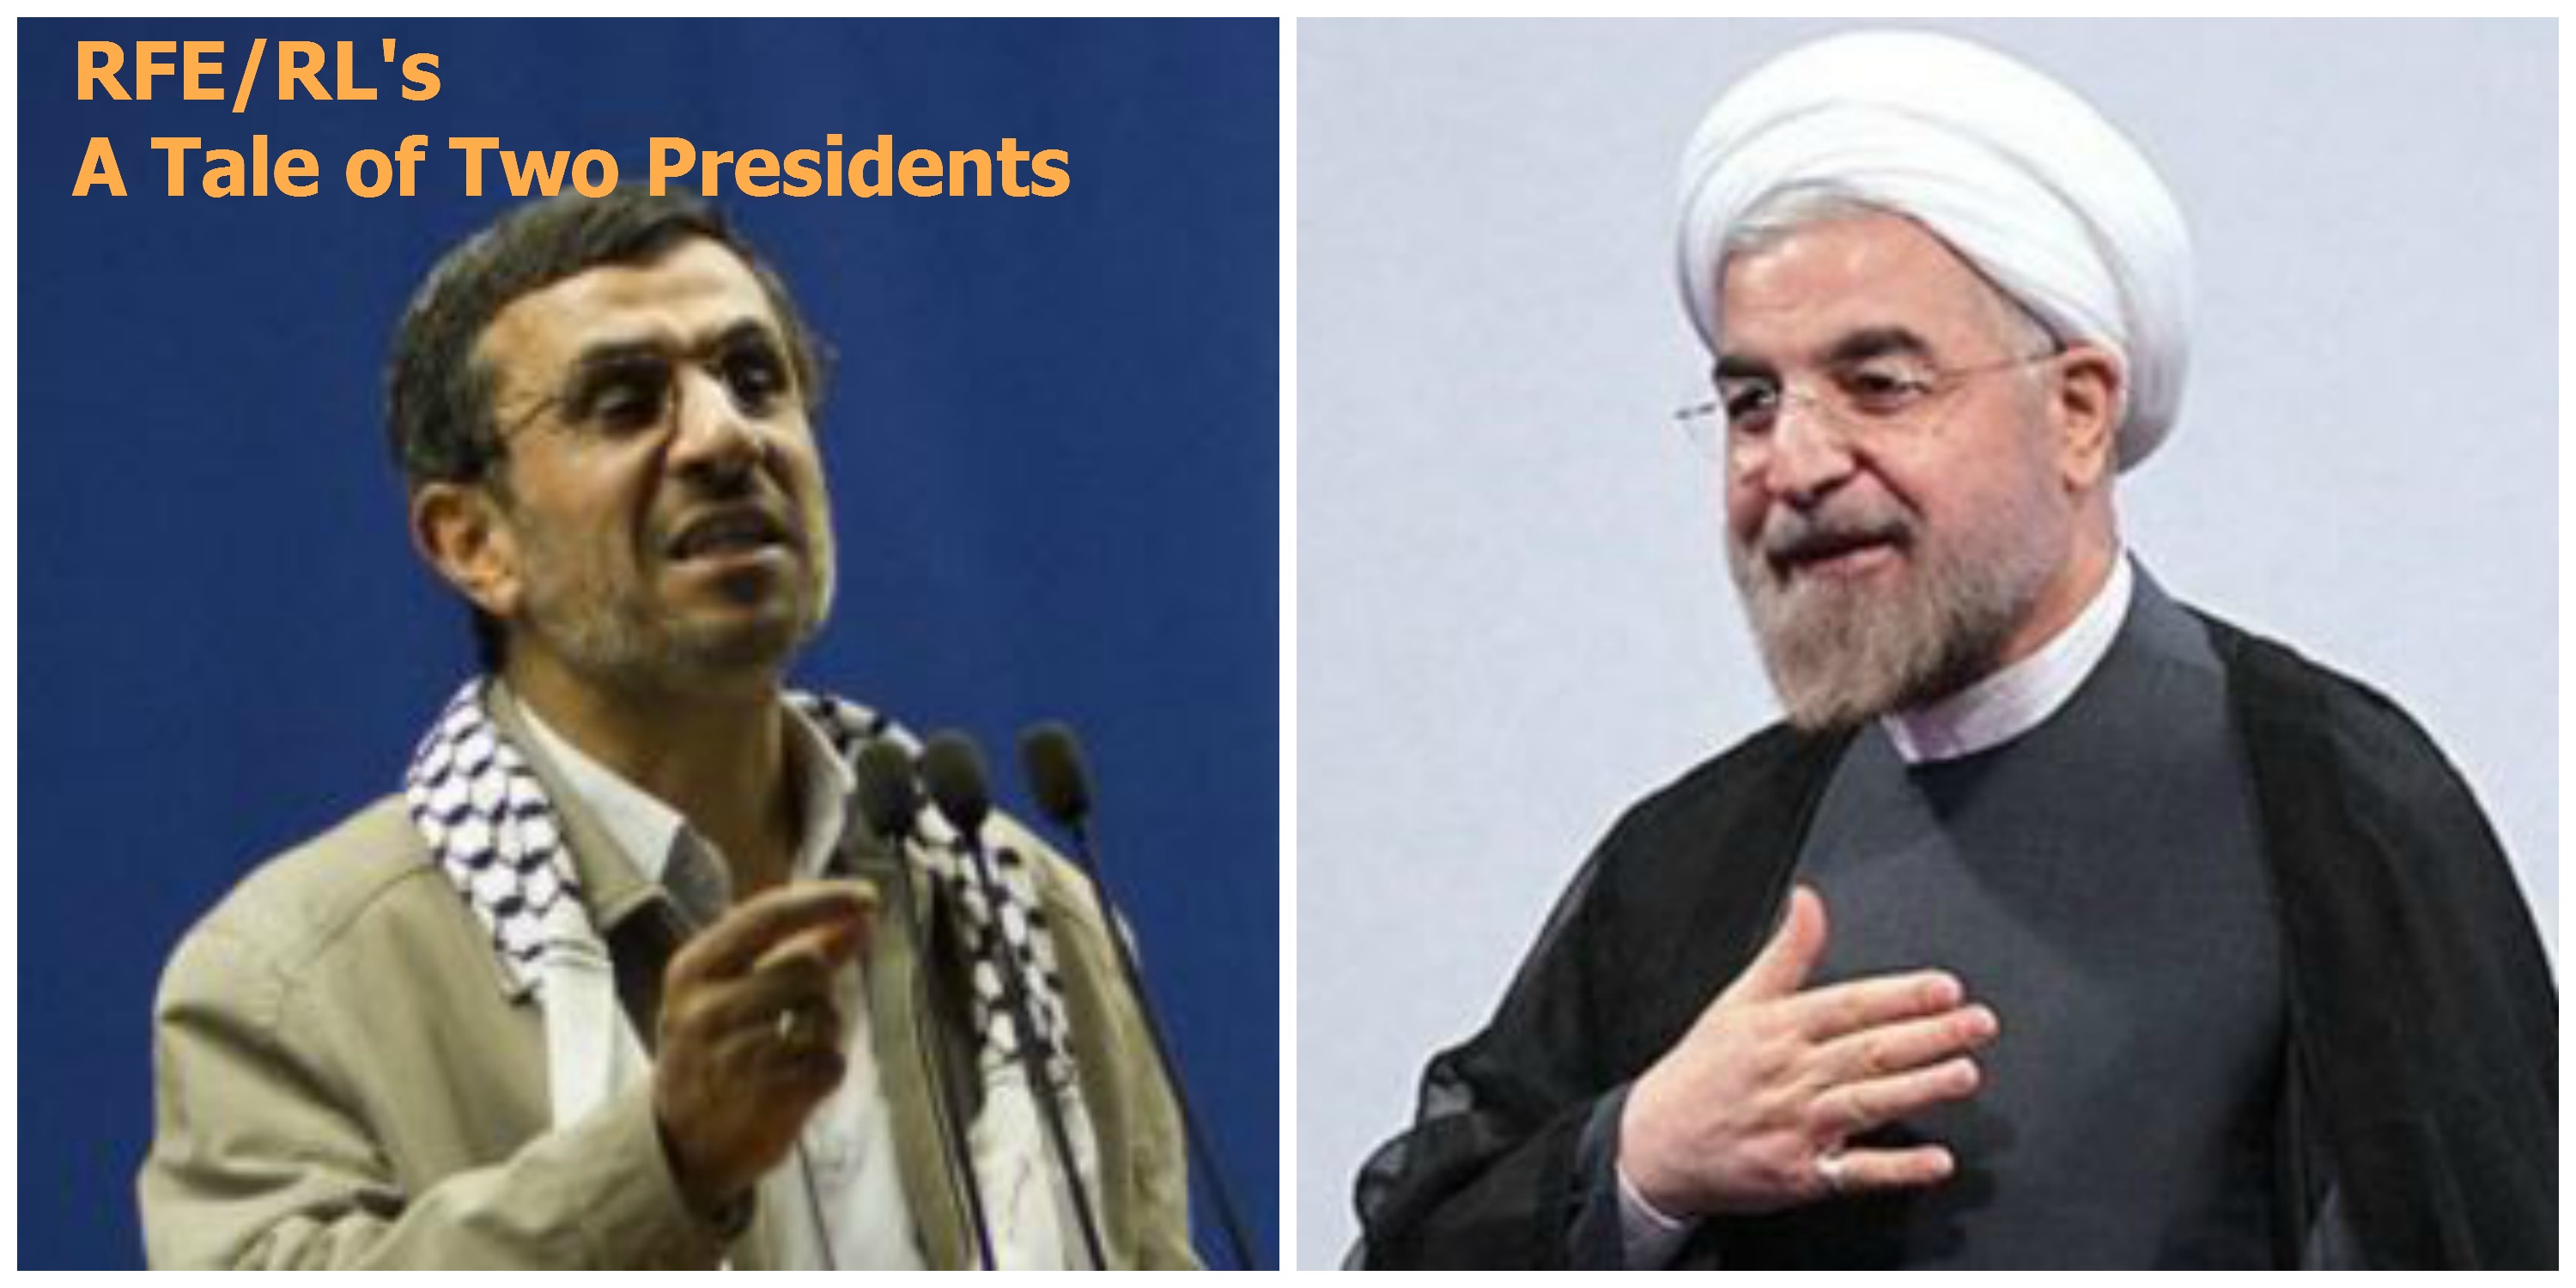 RFE/RL’s Iran insight: A tale of two presidents